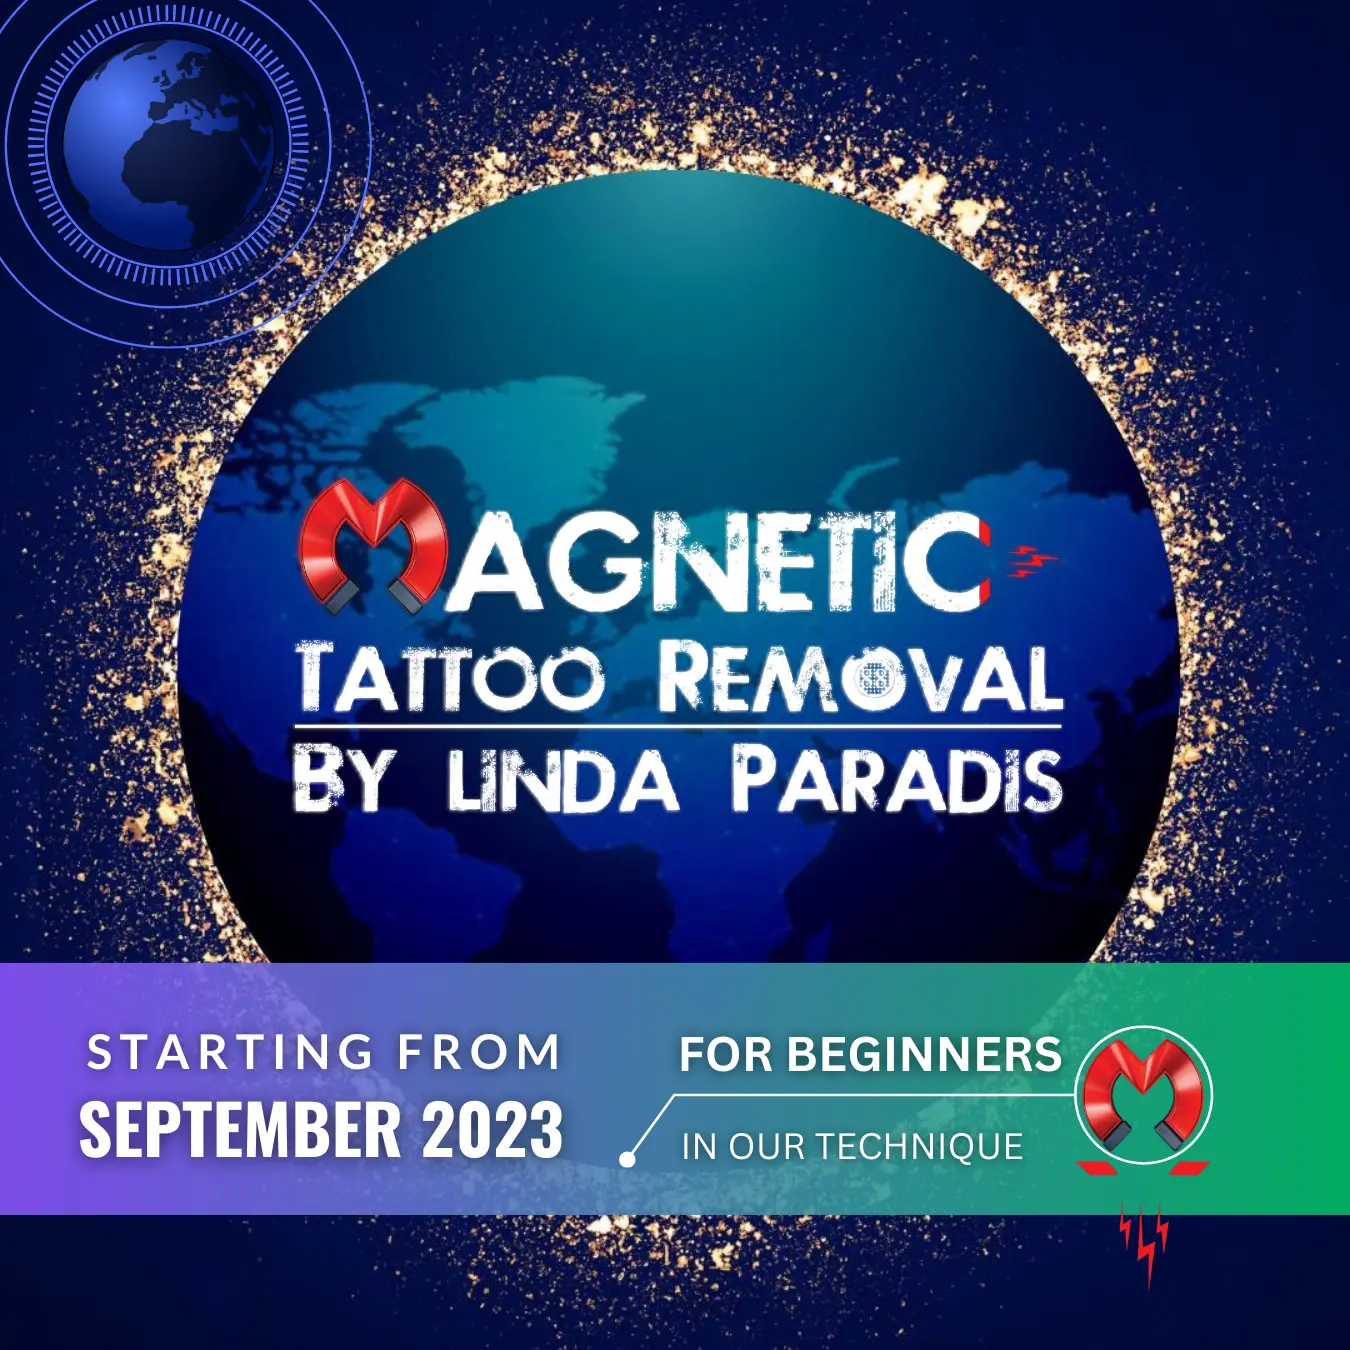 Magnetic Tattoo Removal Online Course with Hands-On